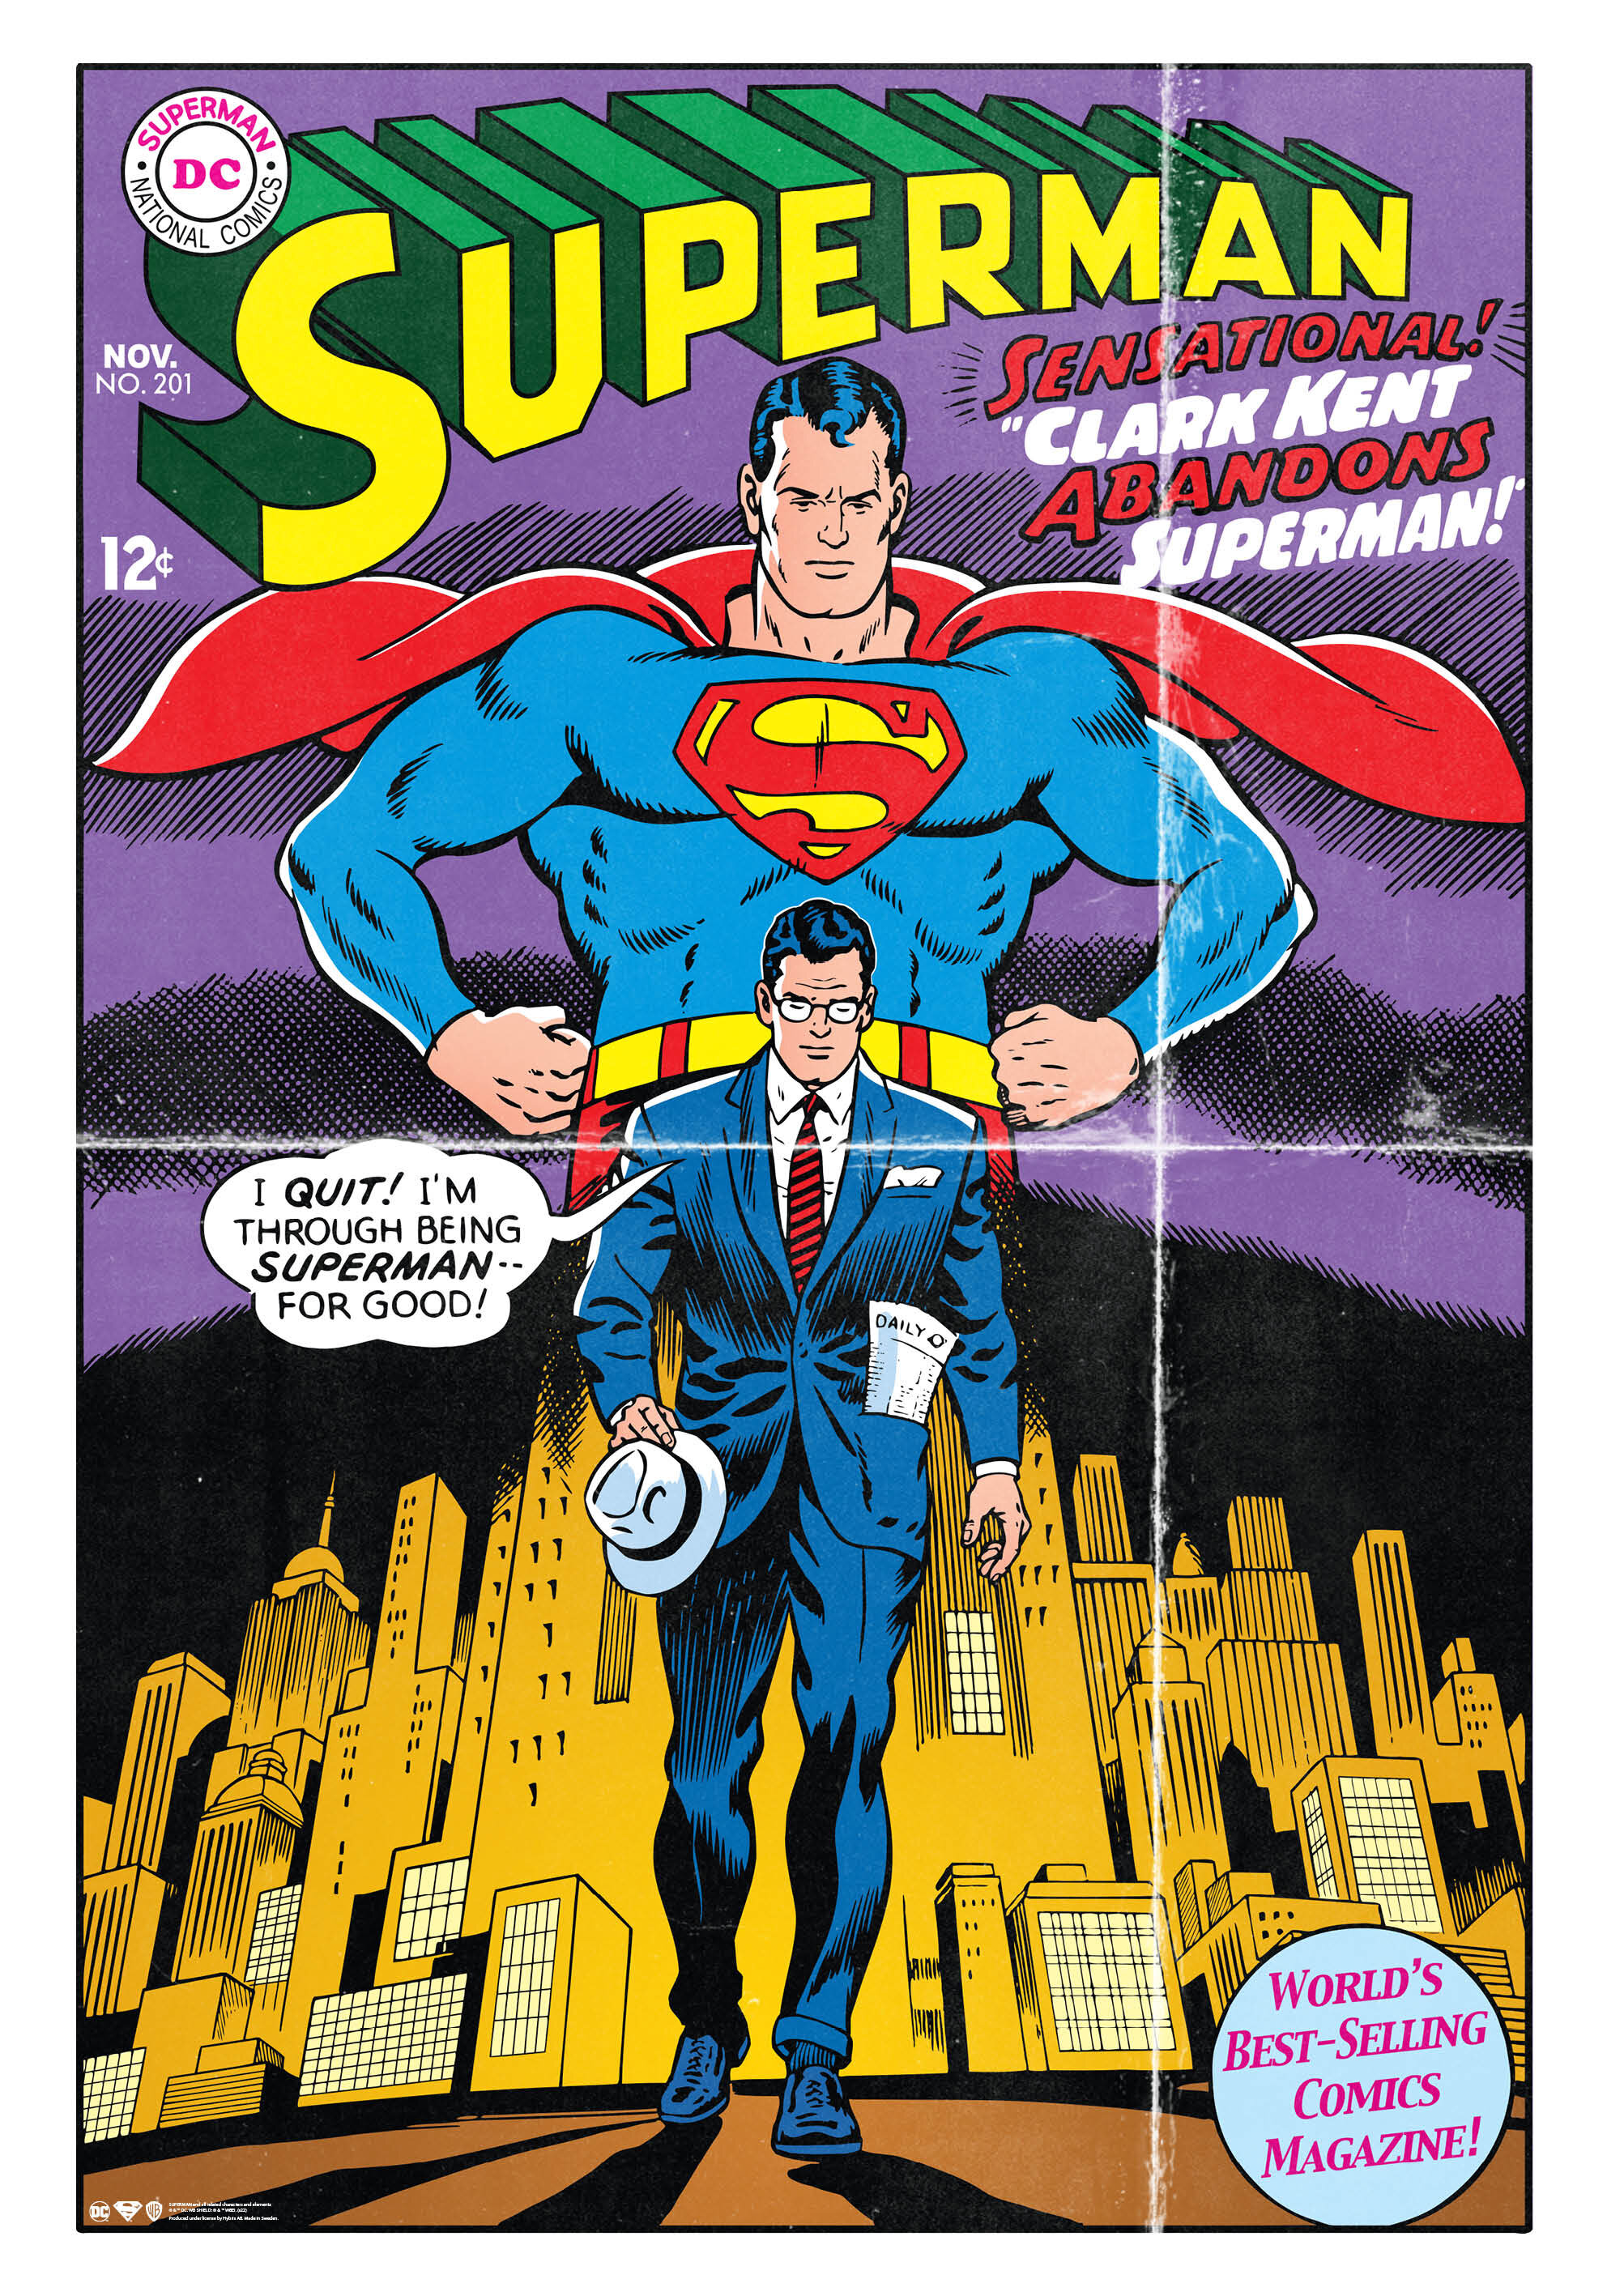 Superman Vintage Comic Book Cover Poster